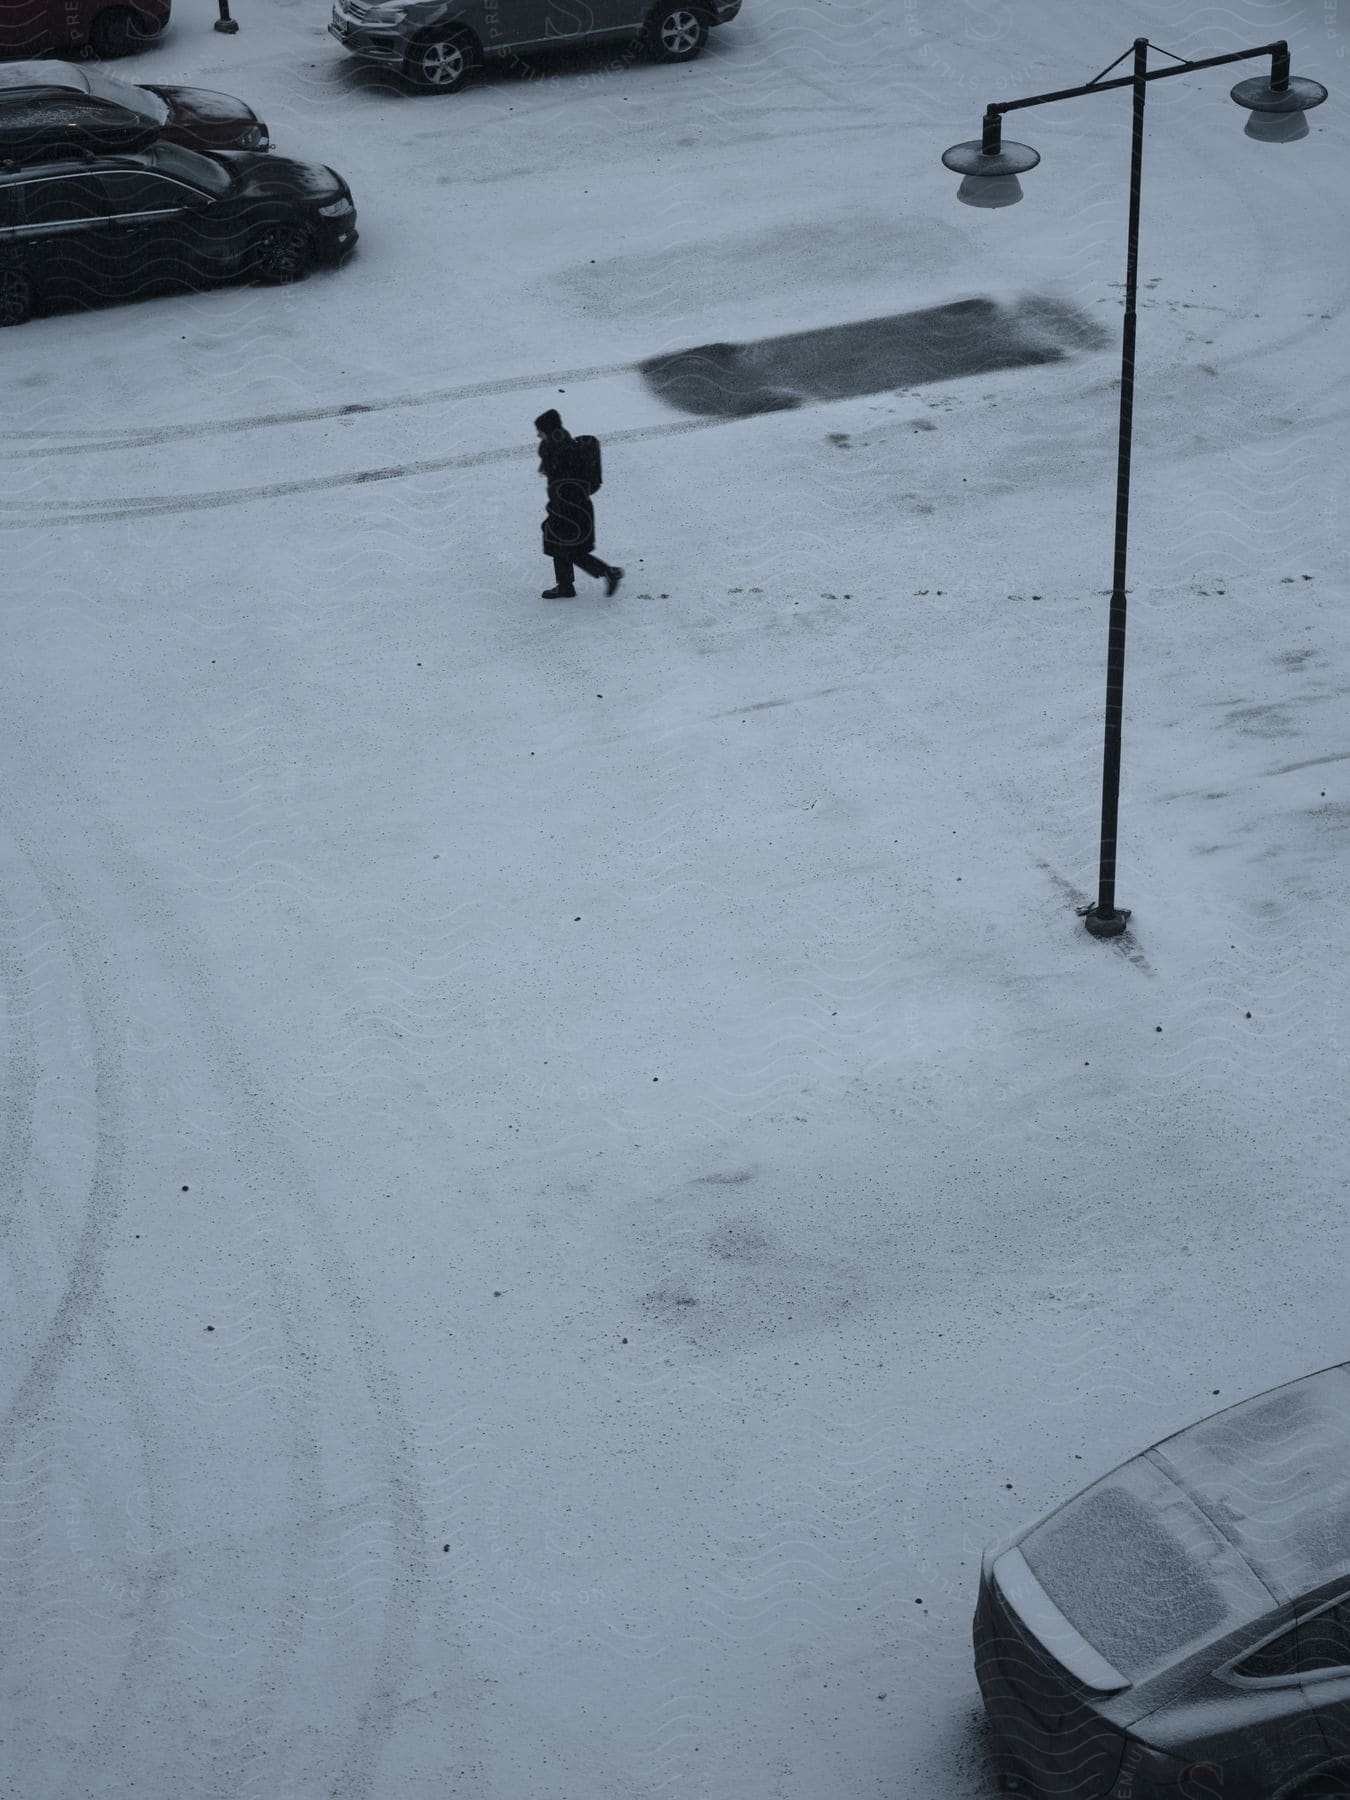 A person crossing a snowy road on a city street